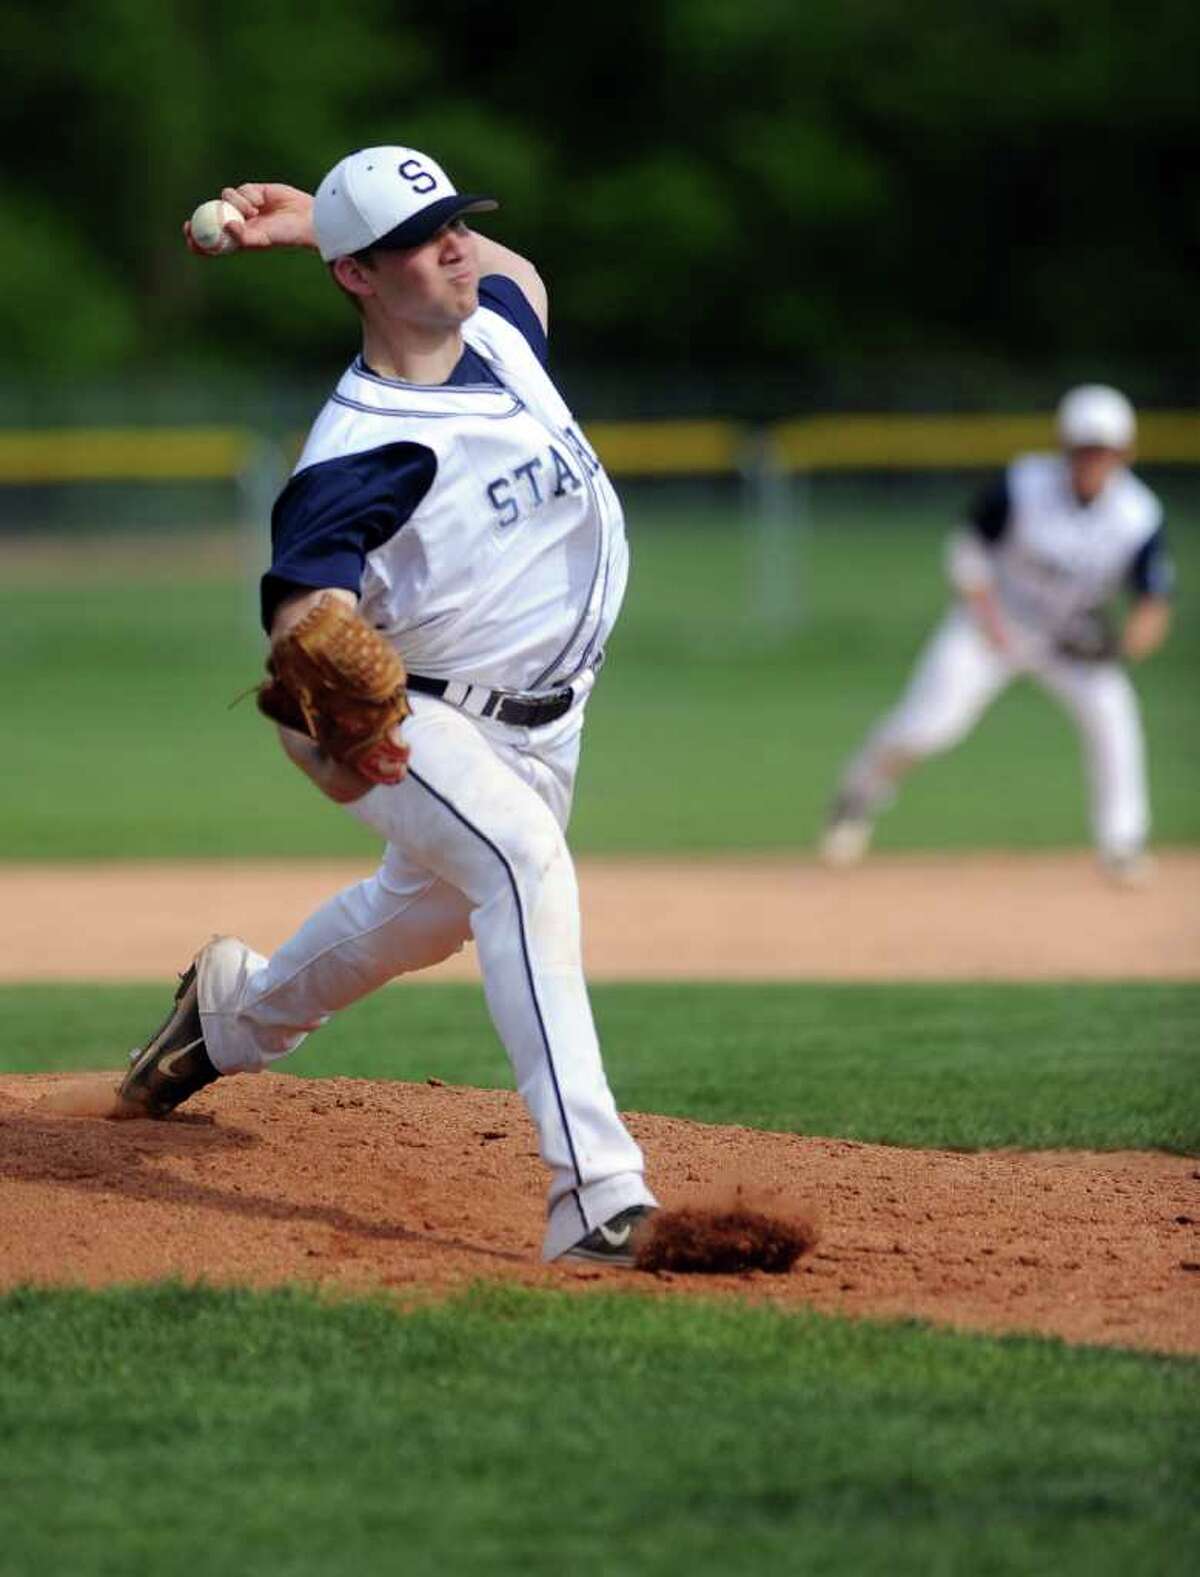 Rob Gau pitches during Wednesday's game against Wilton at Staples High School on May 11, 2011.